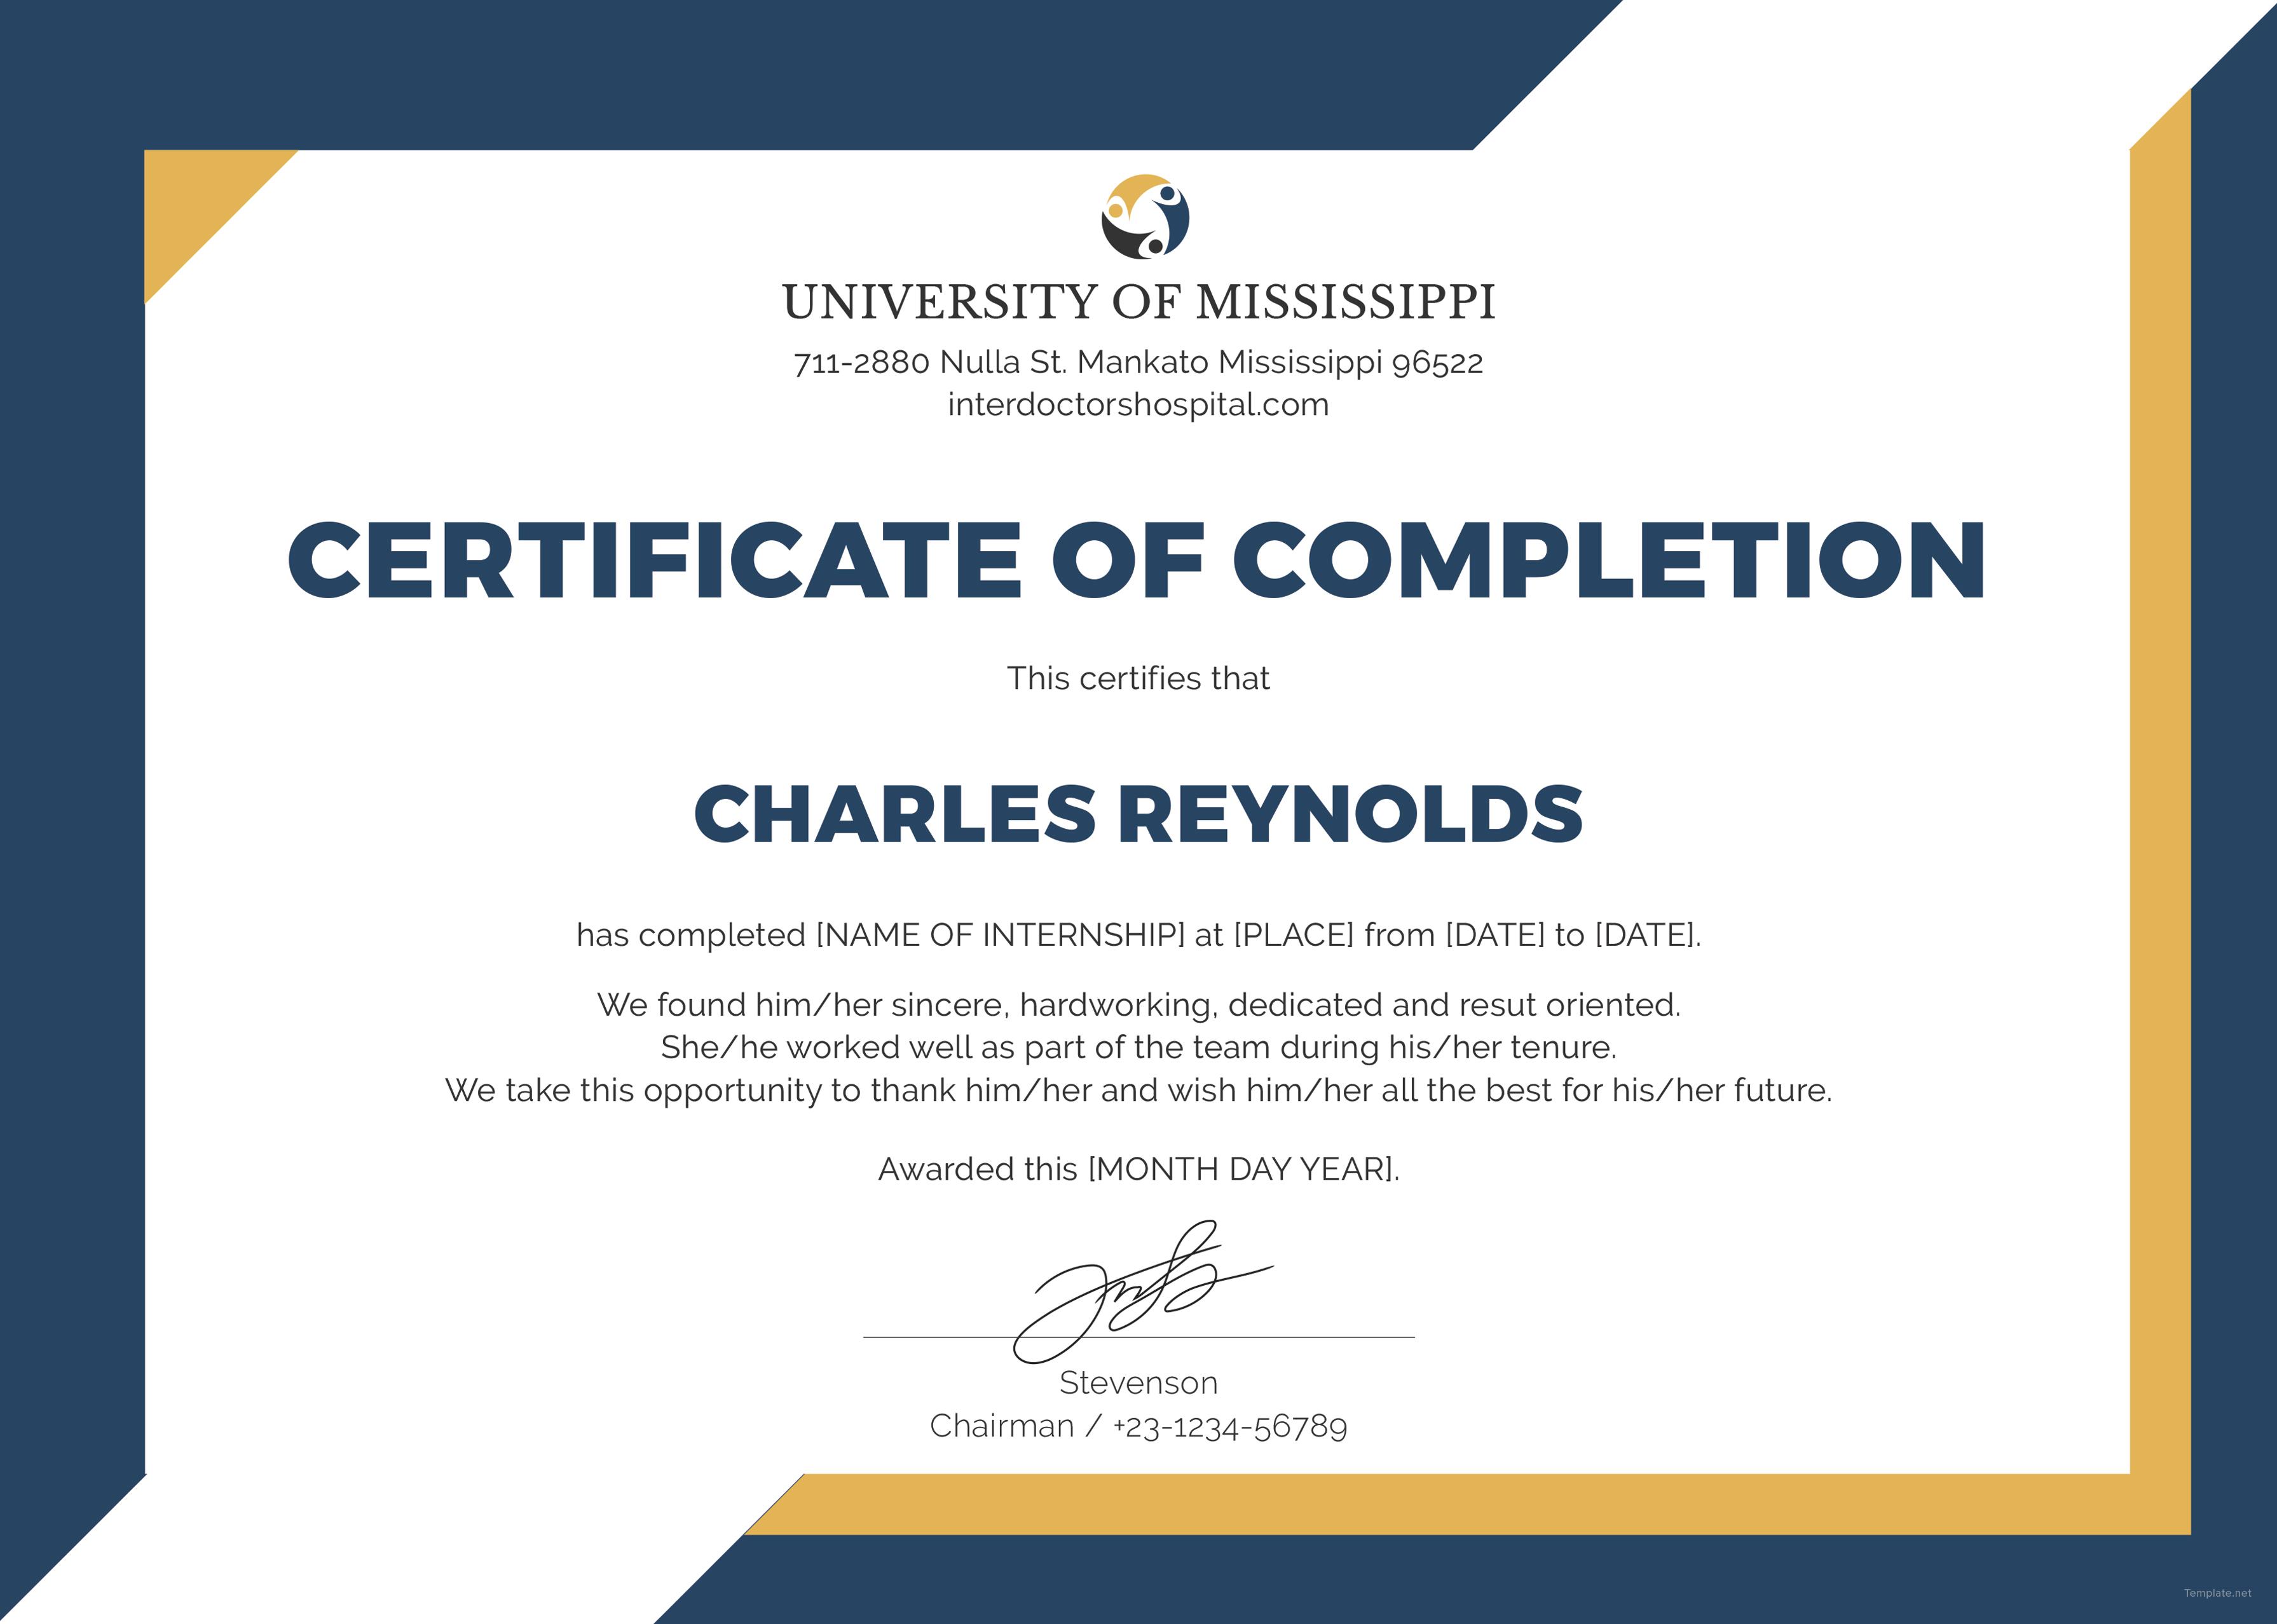 Certificates Of Completion Template from certificateof.com